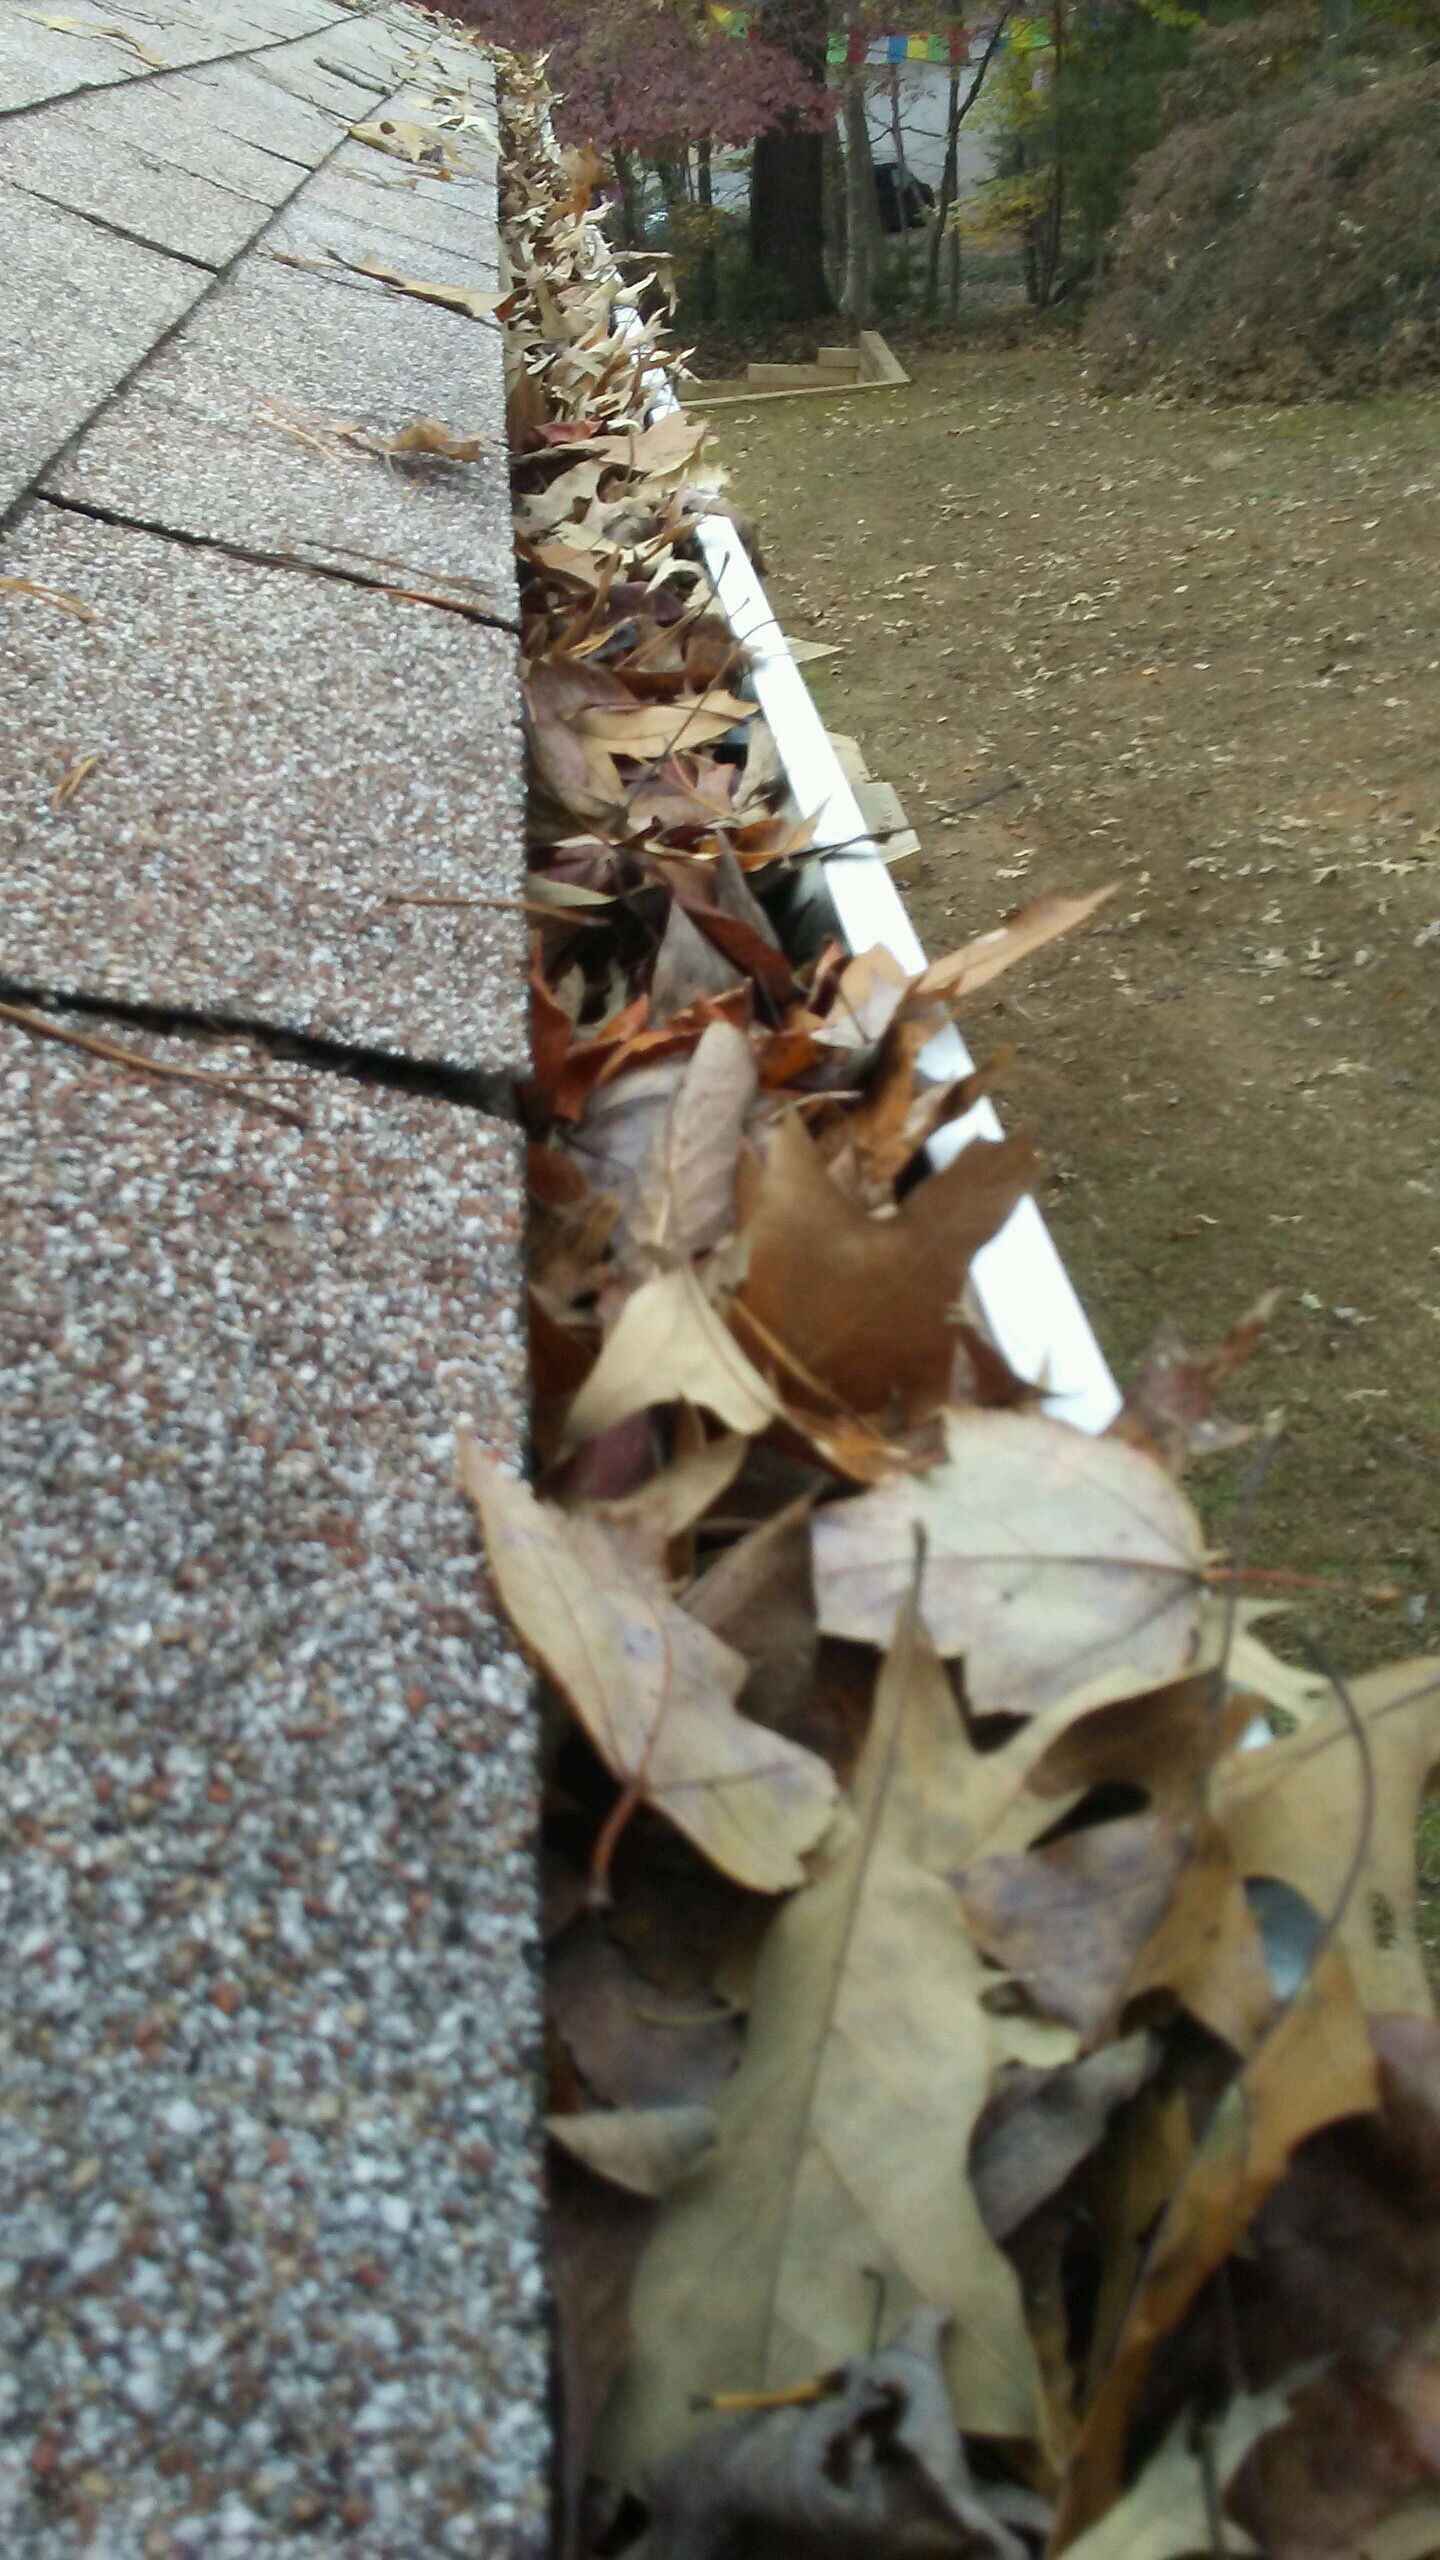 Image of a gutter full of leaves and debris in Charlottesville VA